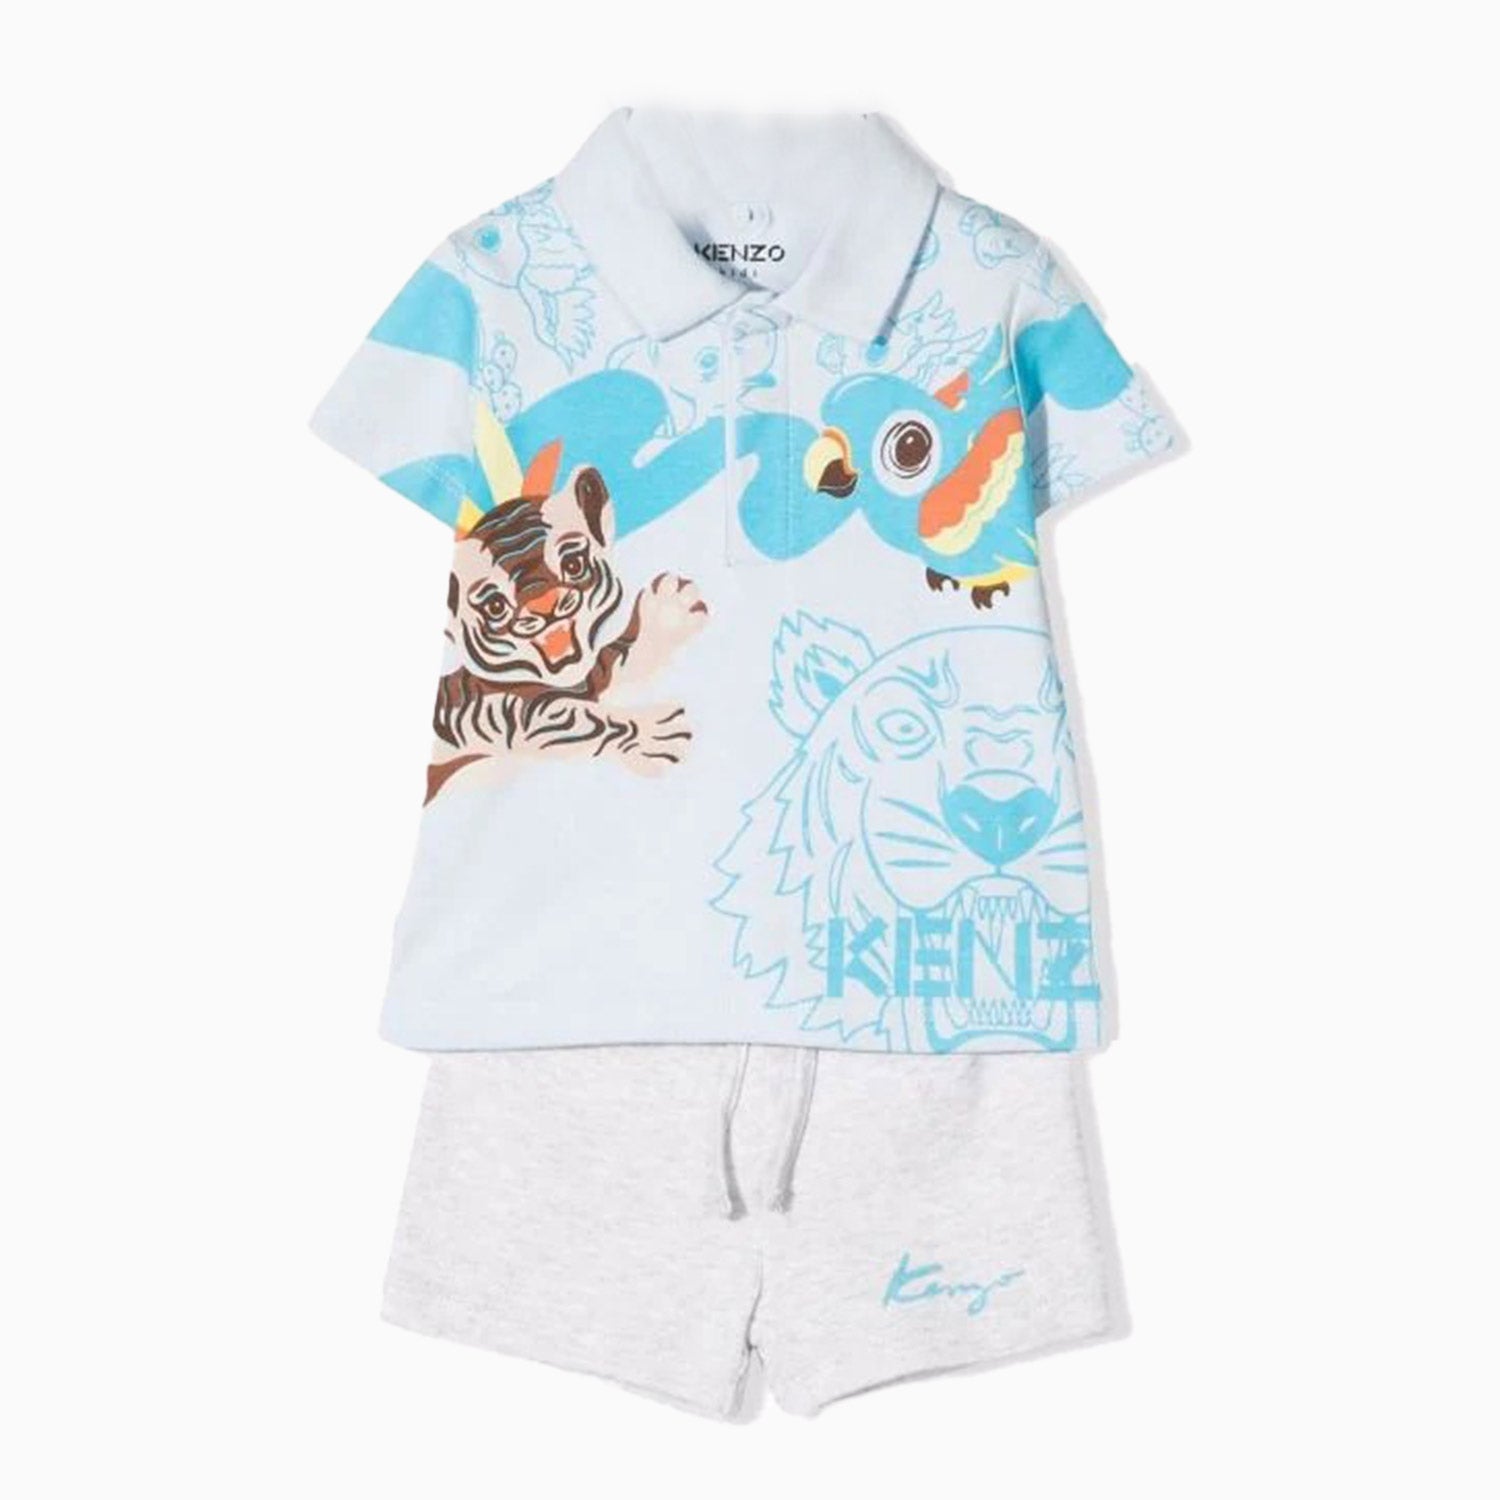 Kenzo Kid's Polo Shirt And Short Outfit - Color: Pale Blue - Kids Premium Clothing -